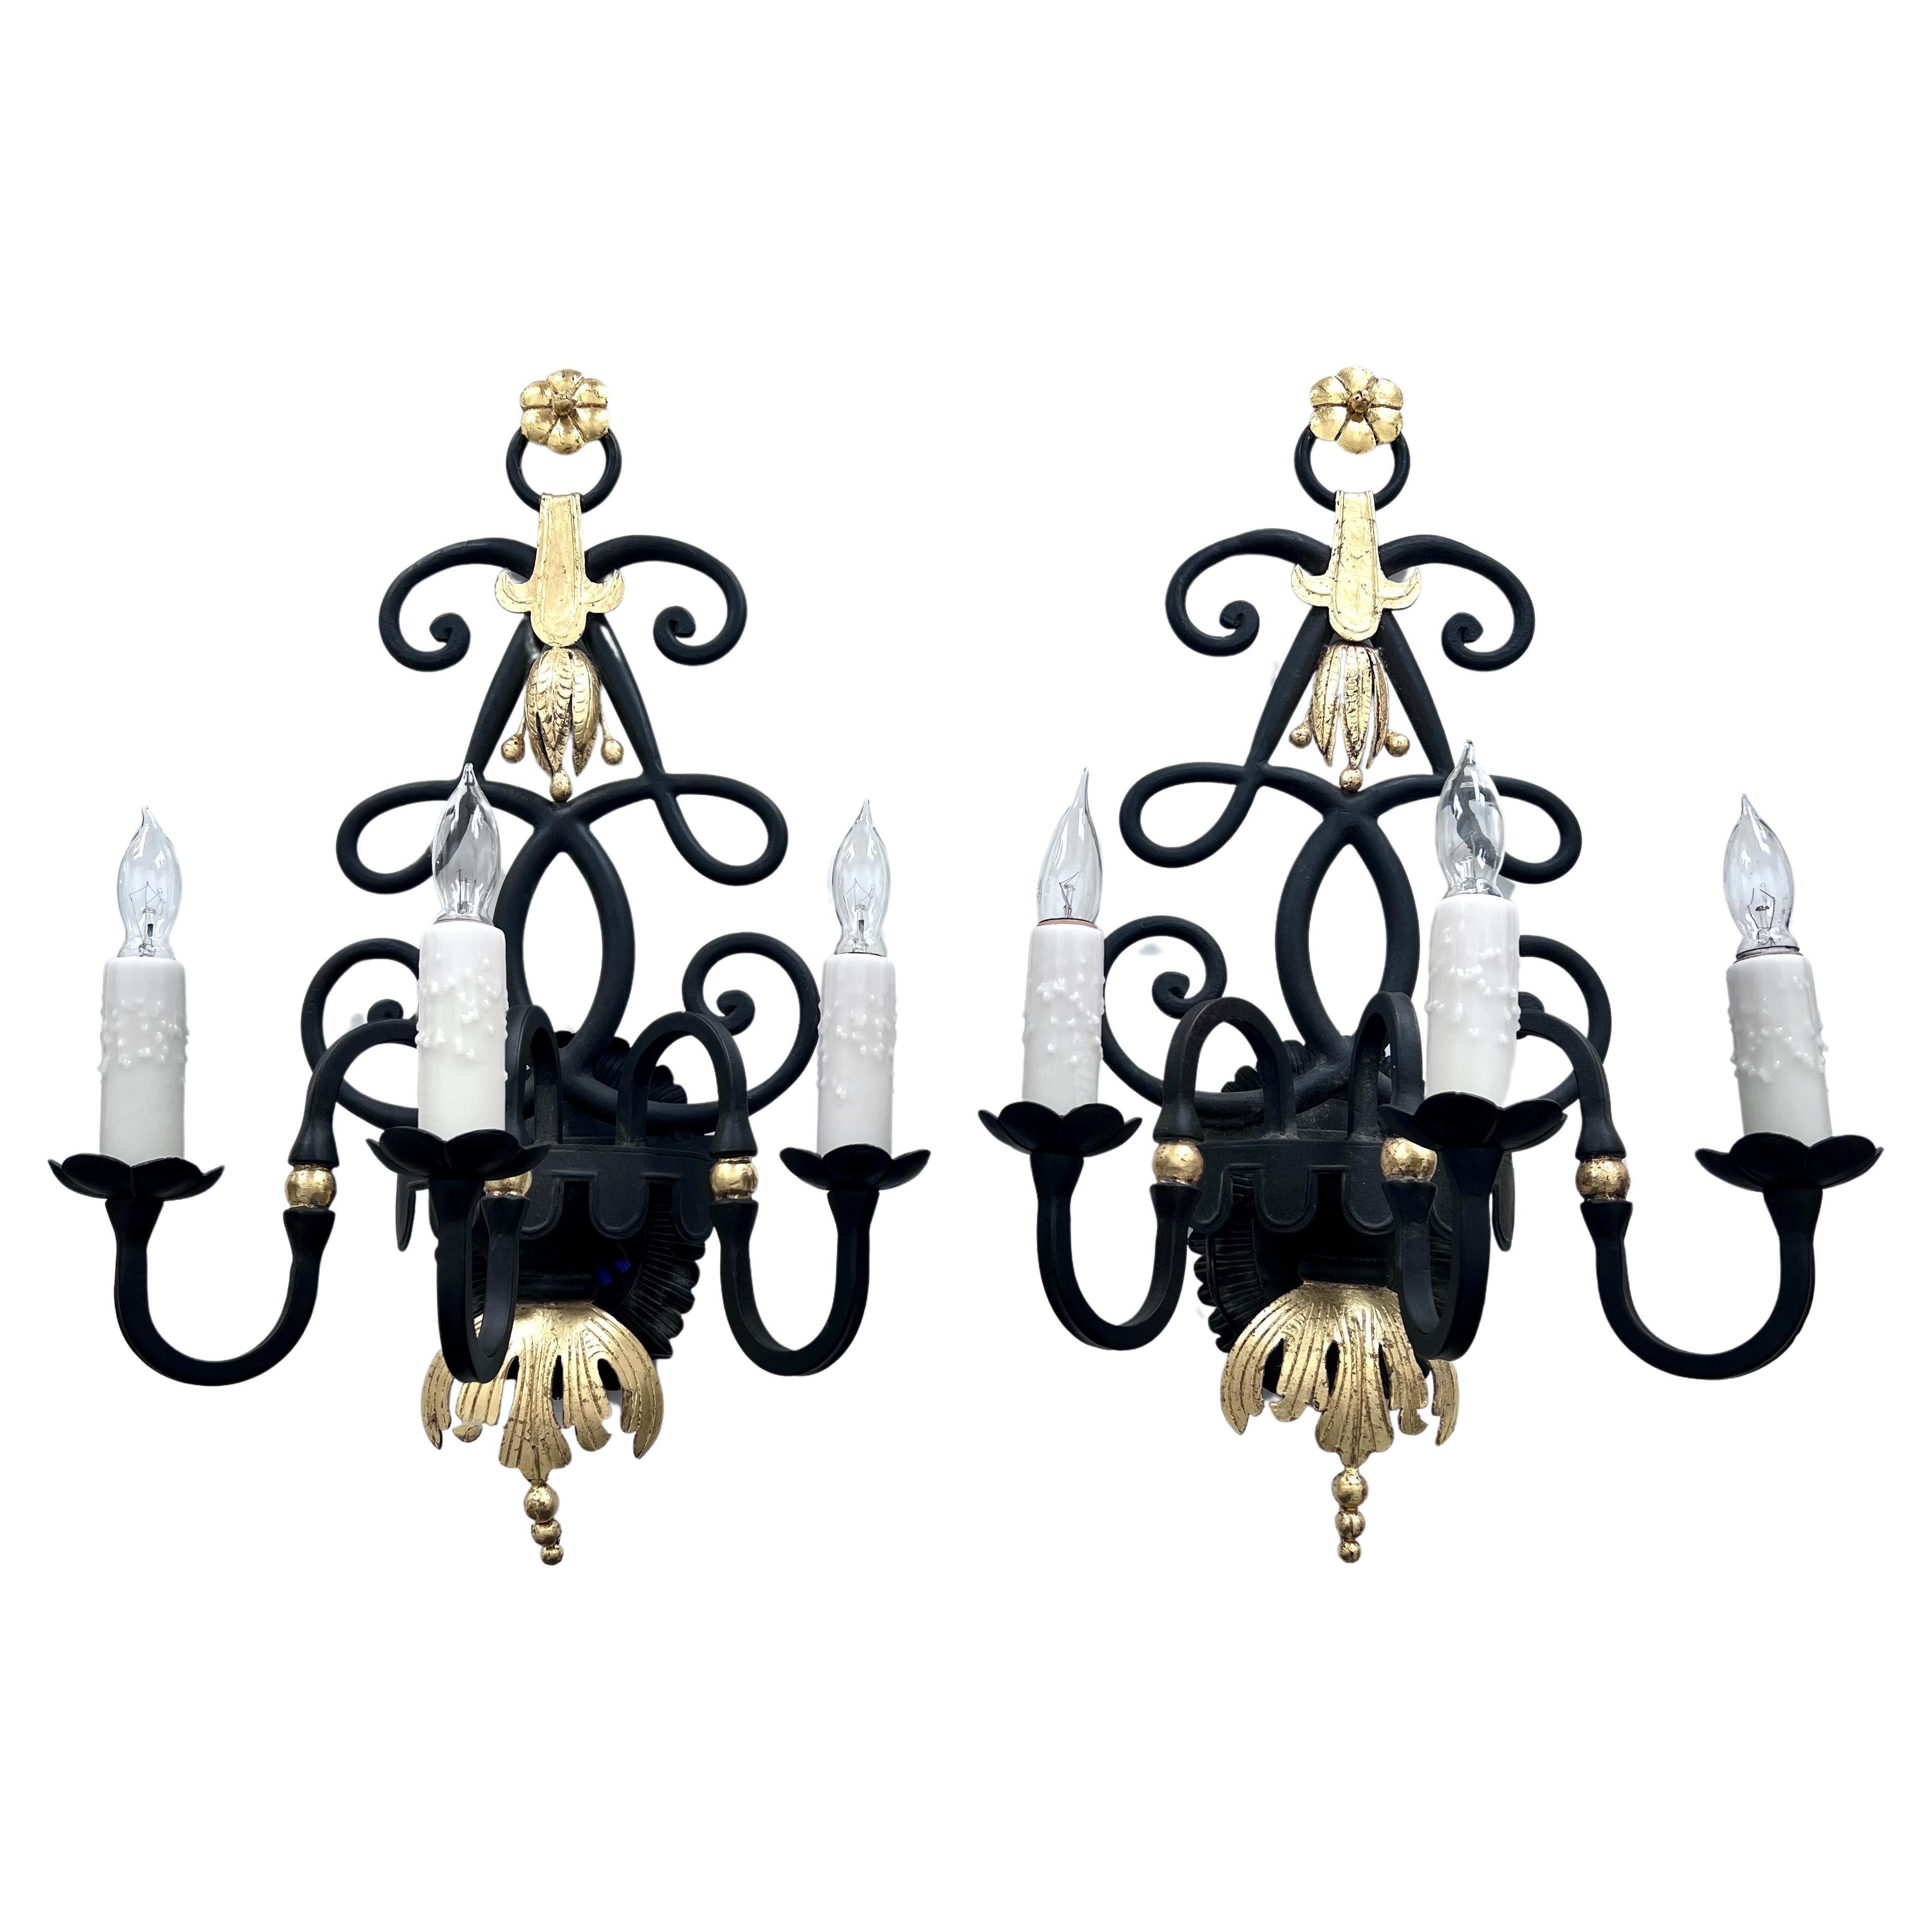 A stunning pair of Wrought Iron wall Sconces in the style of Rene Drouet and Gilbert Poillerat - the pair are hand wrought with burnished 24k Gold to the details - each holds three stand socket Chandelier light bulbs.

The Art Deco look is very